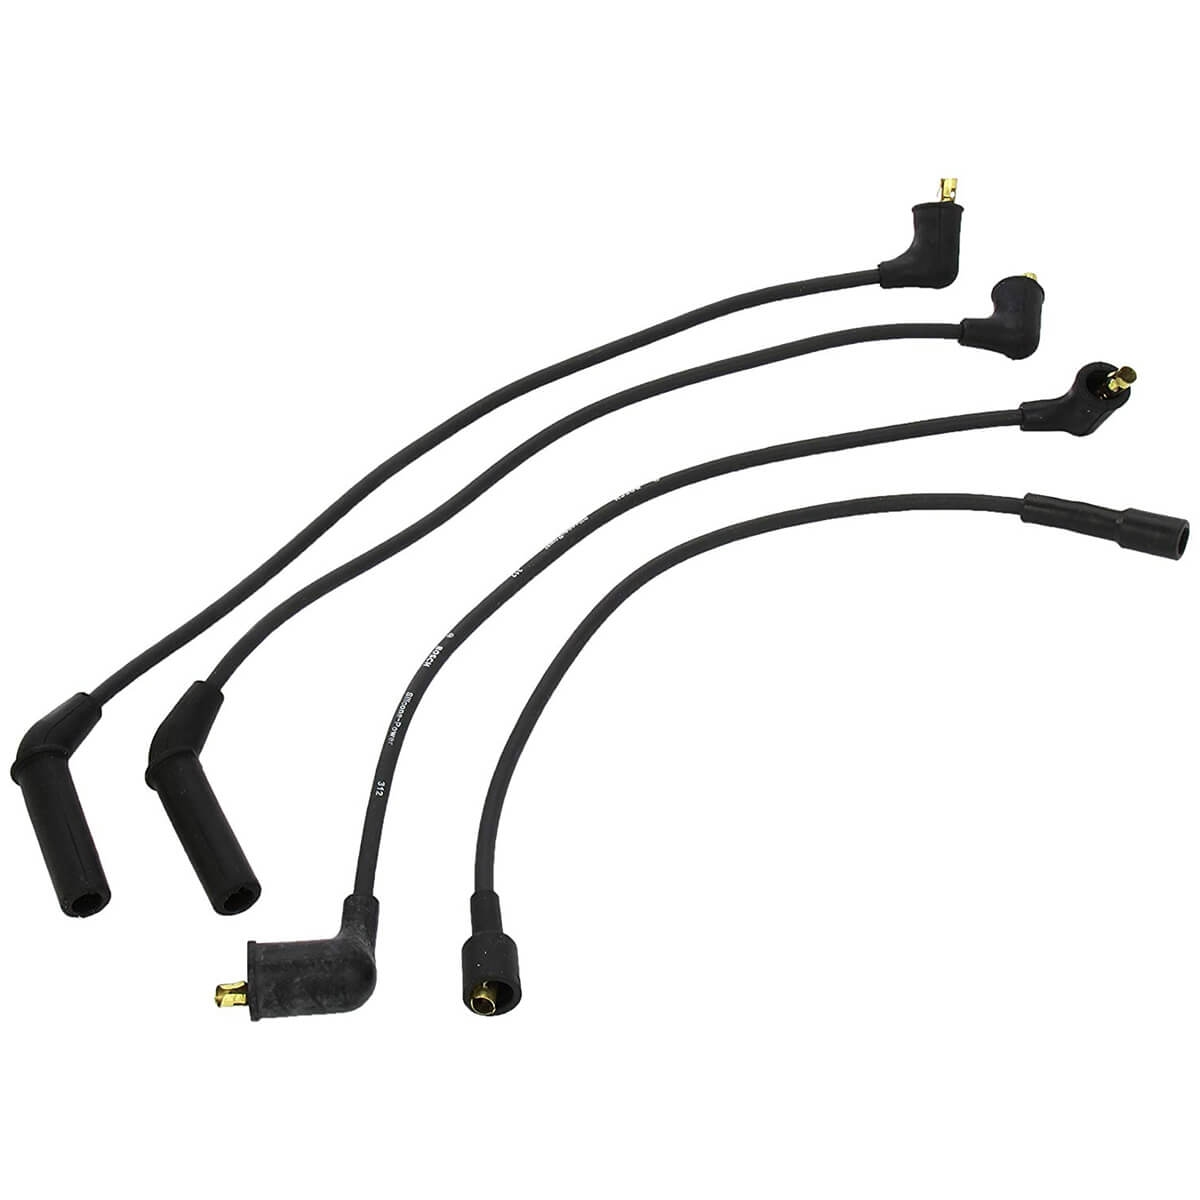 HONDA S2000 Ignition Cable Kit